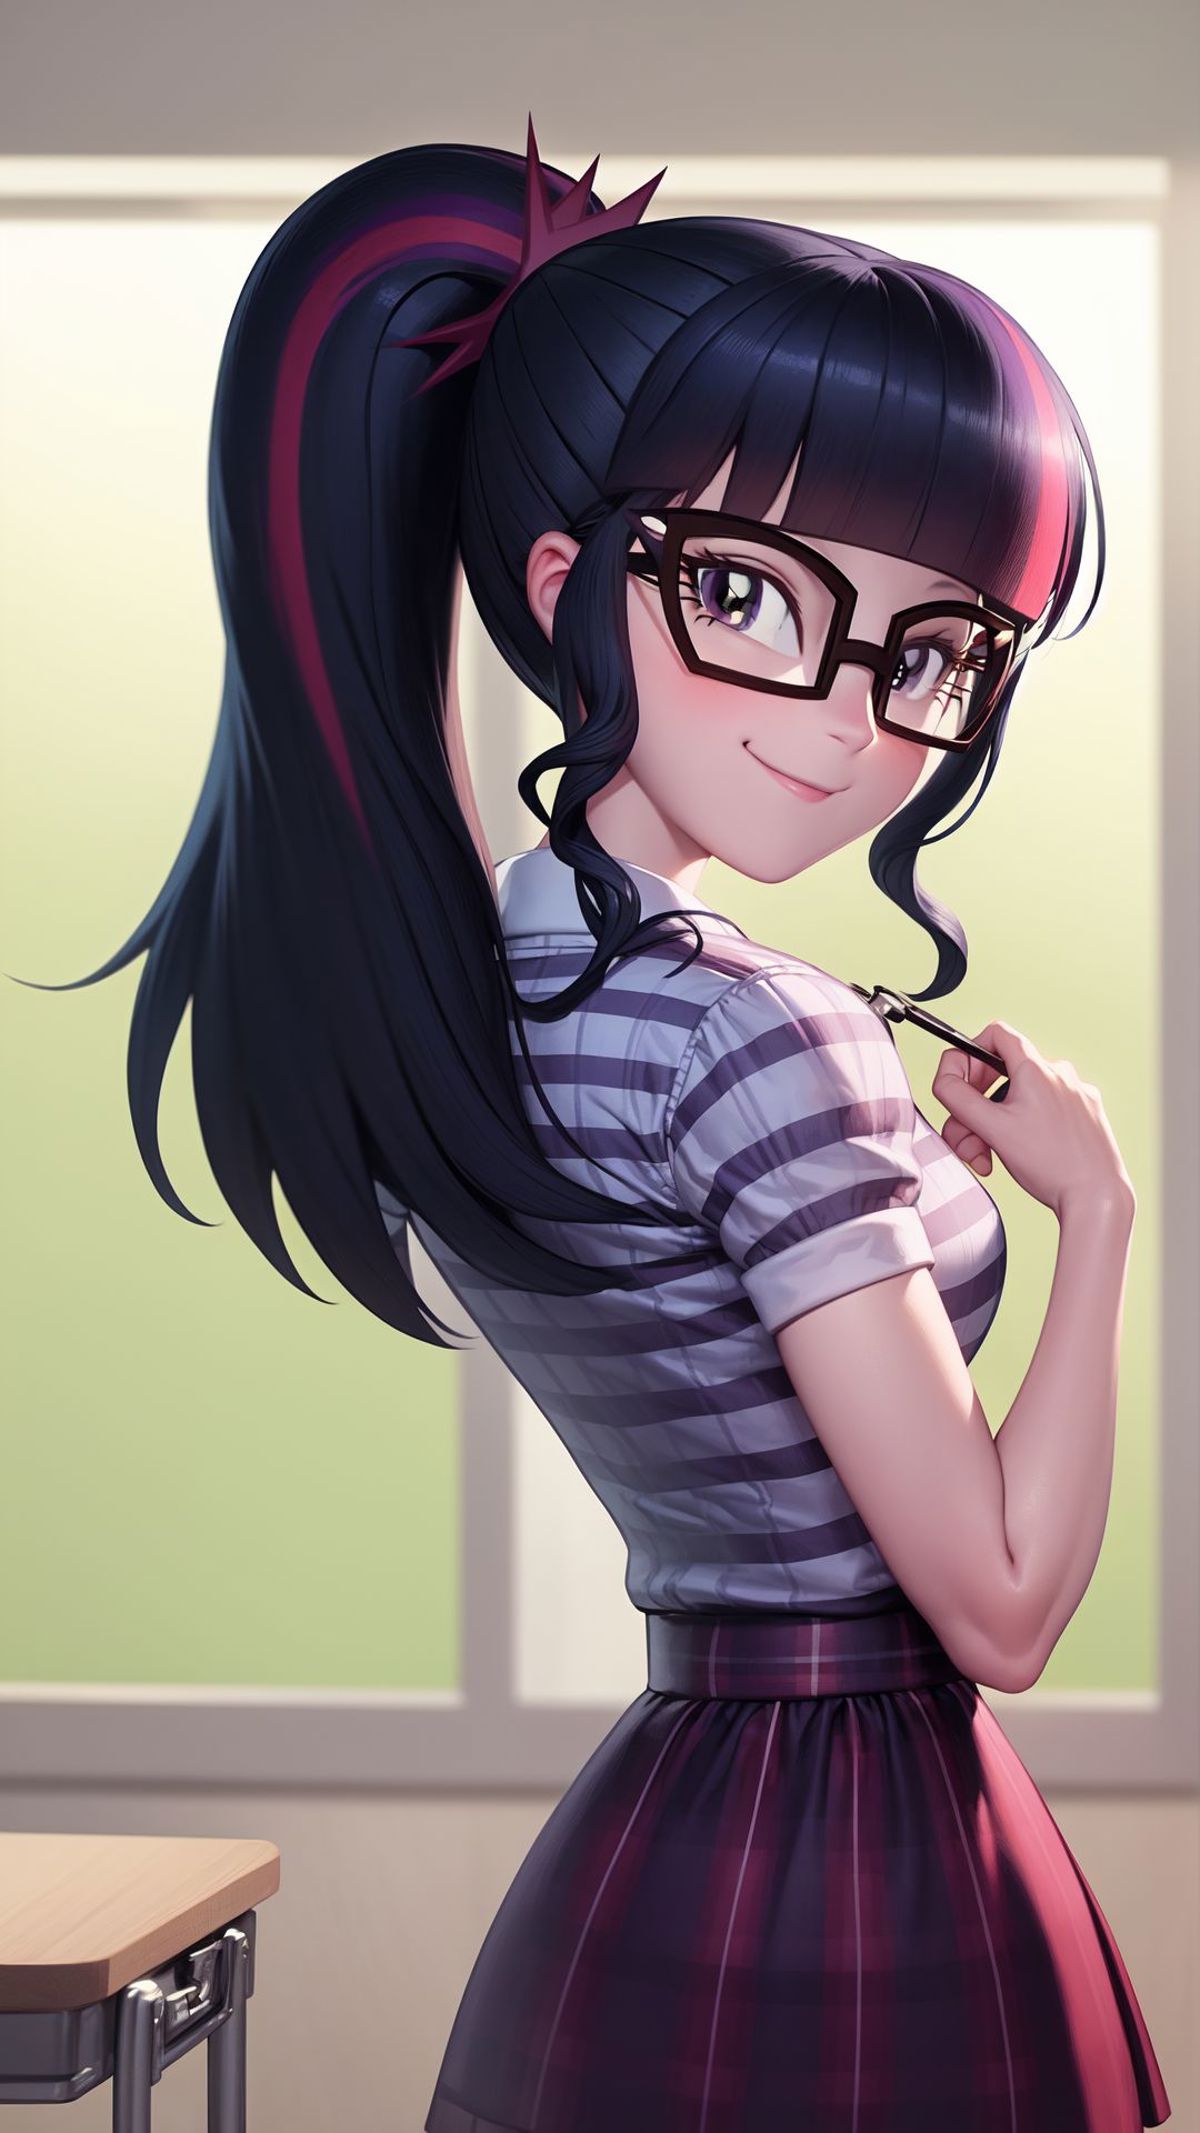 Twilight Sparkle | My Little Pony / Equestria Girls image by marusame